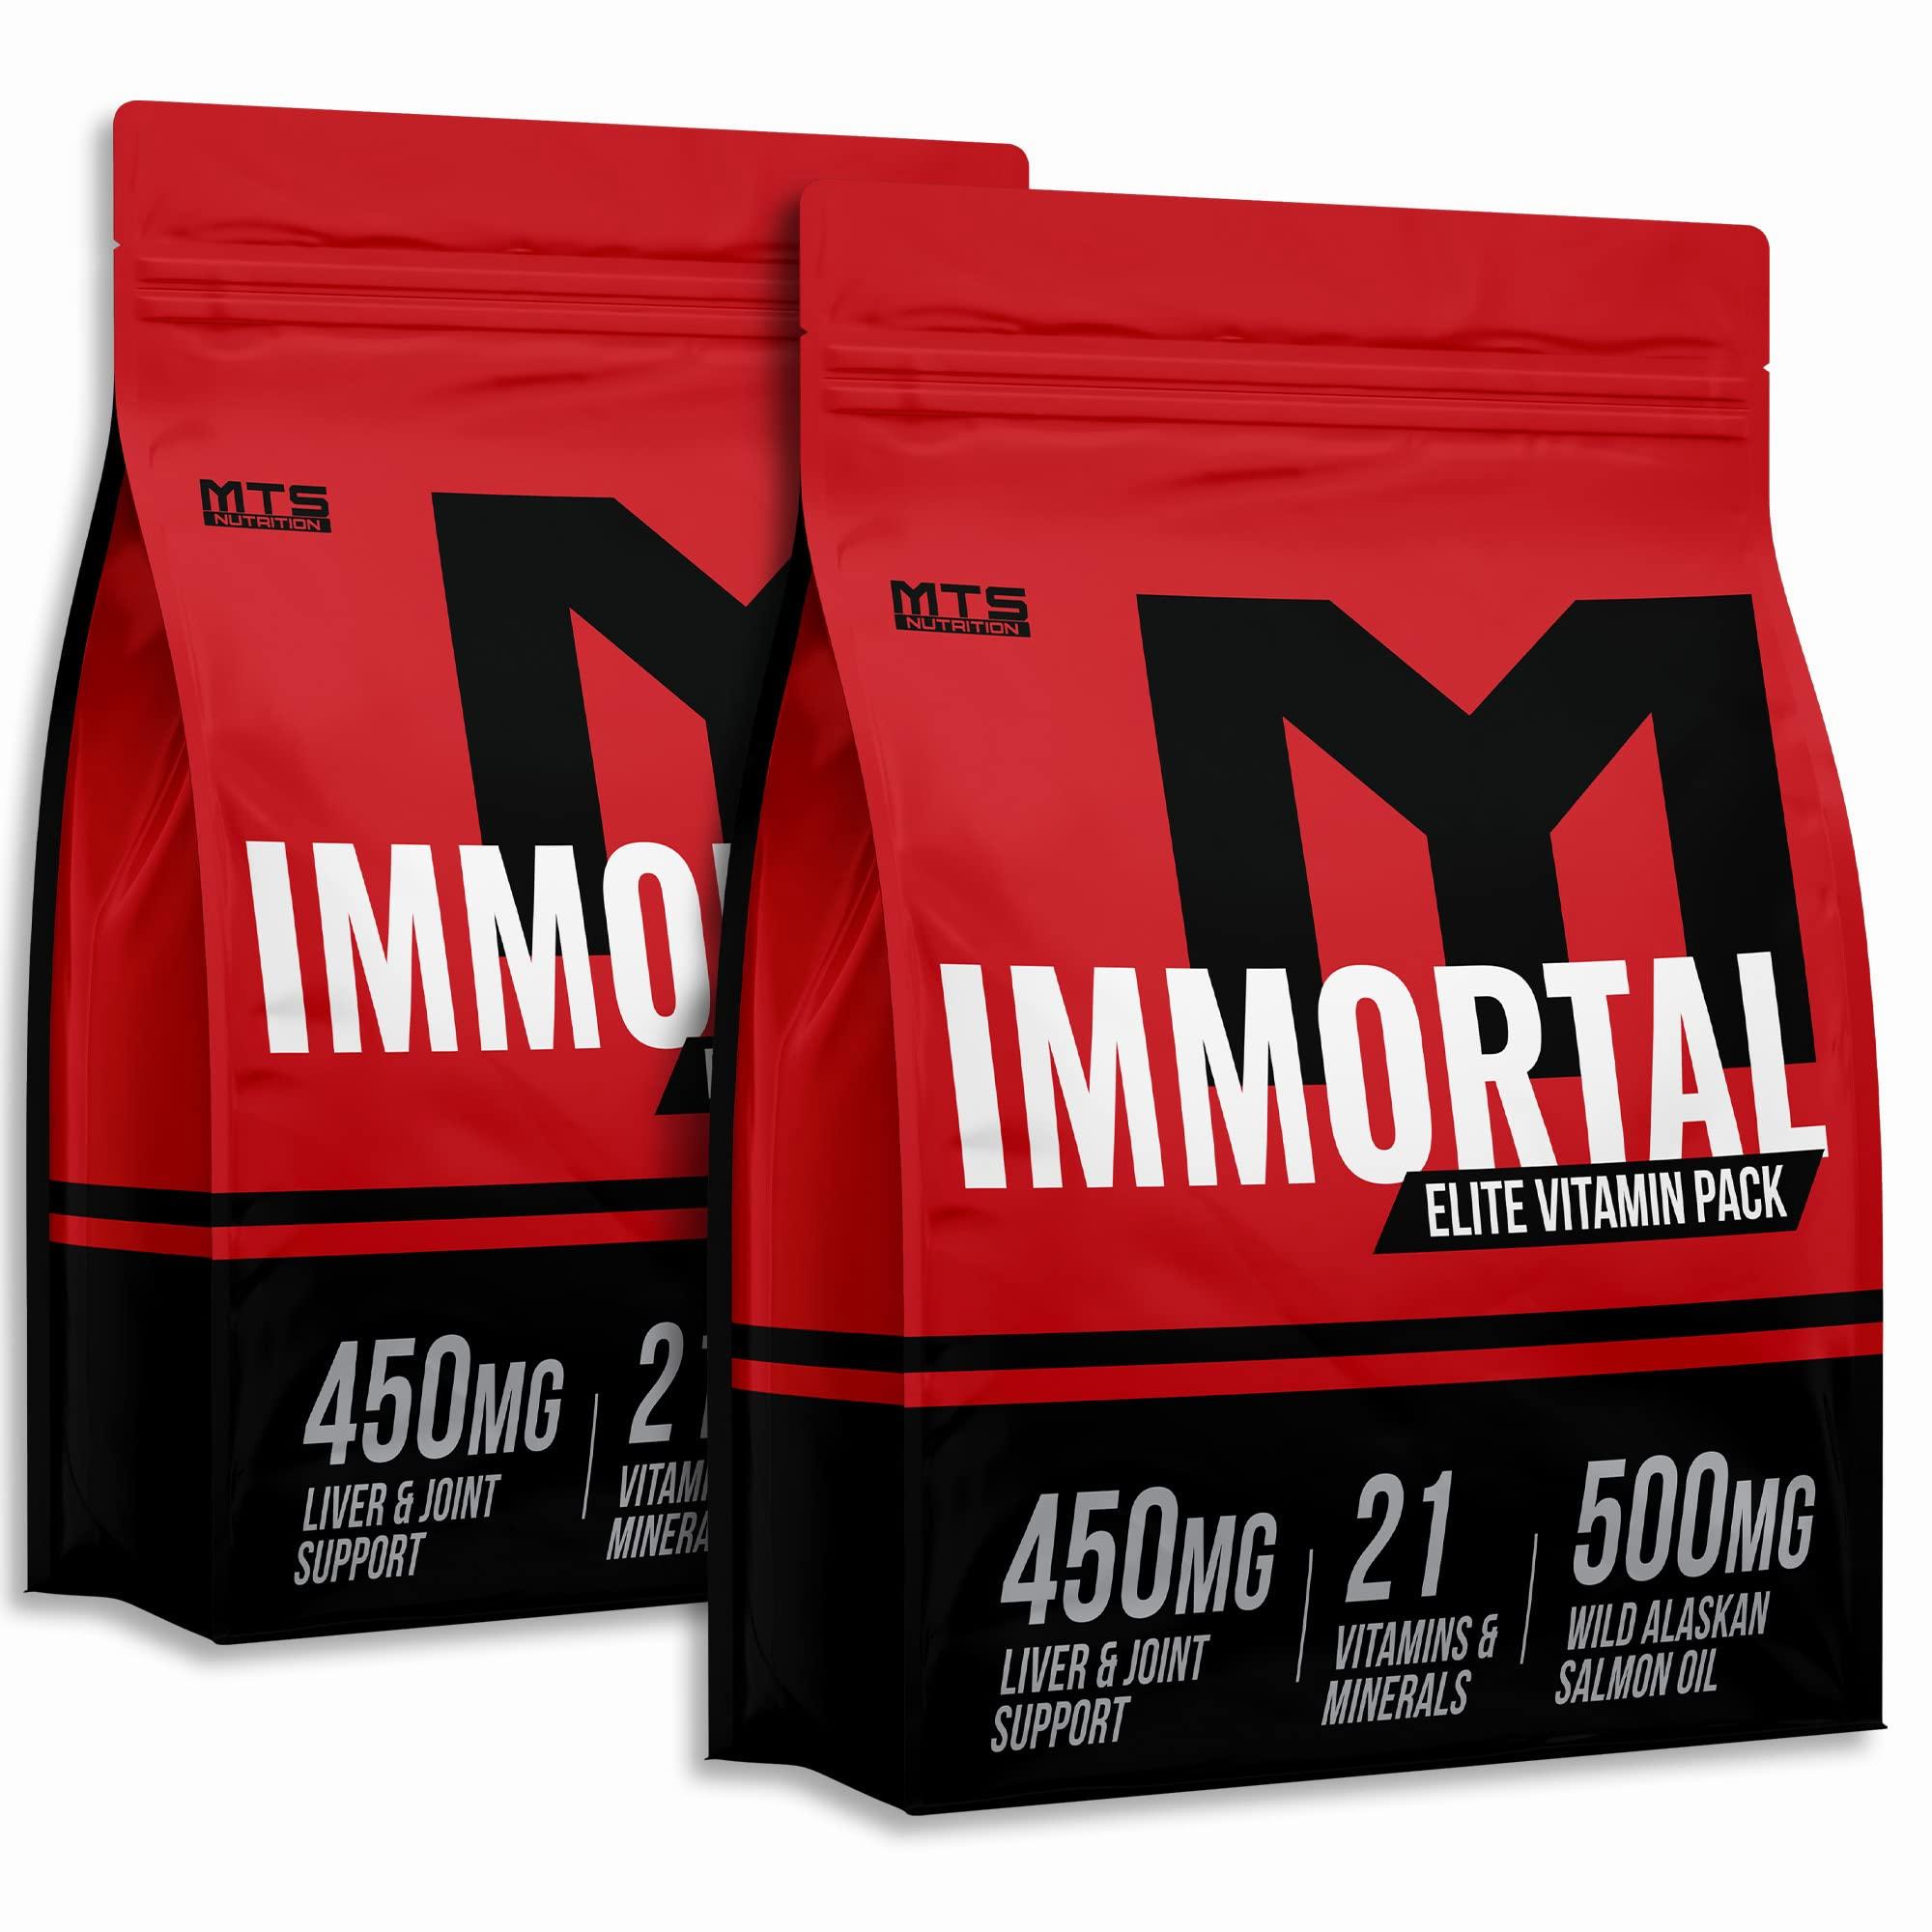 Two red bags of Immortal Elite Vitamin Pack, each with black text and a black logo of a Y with a circle around it.